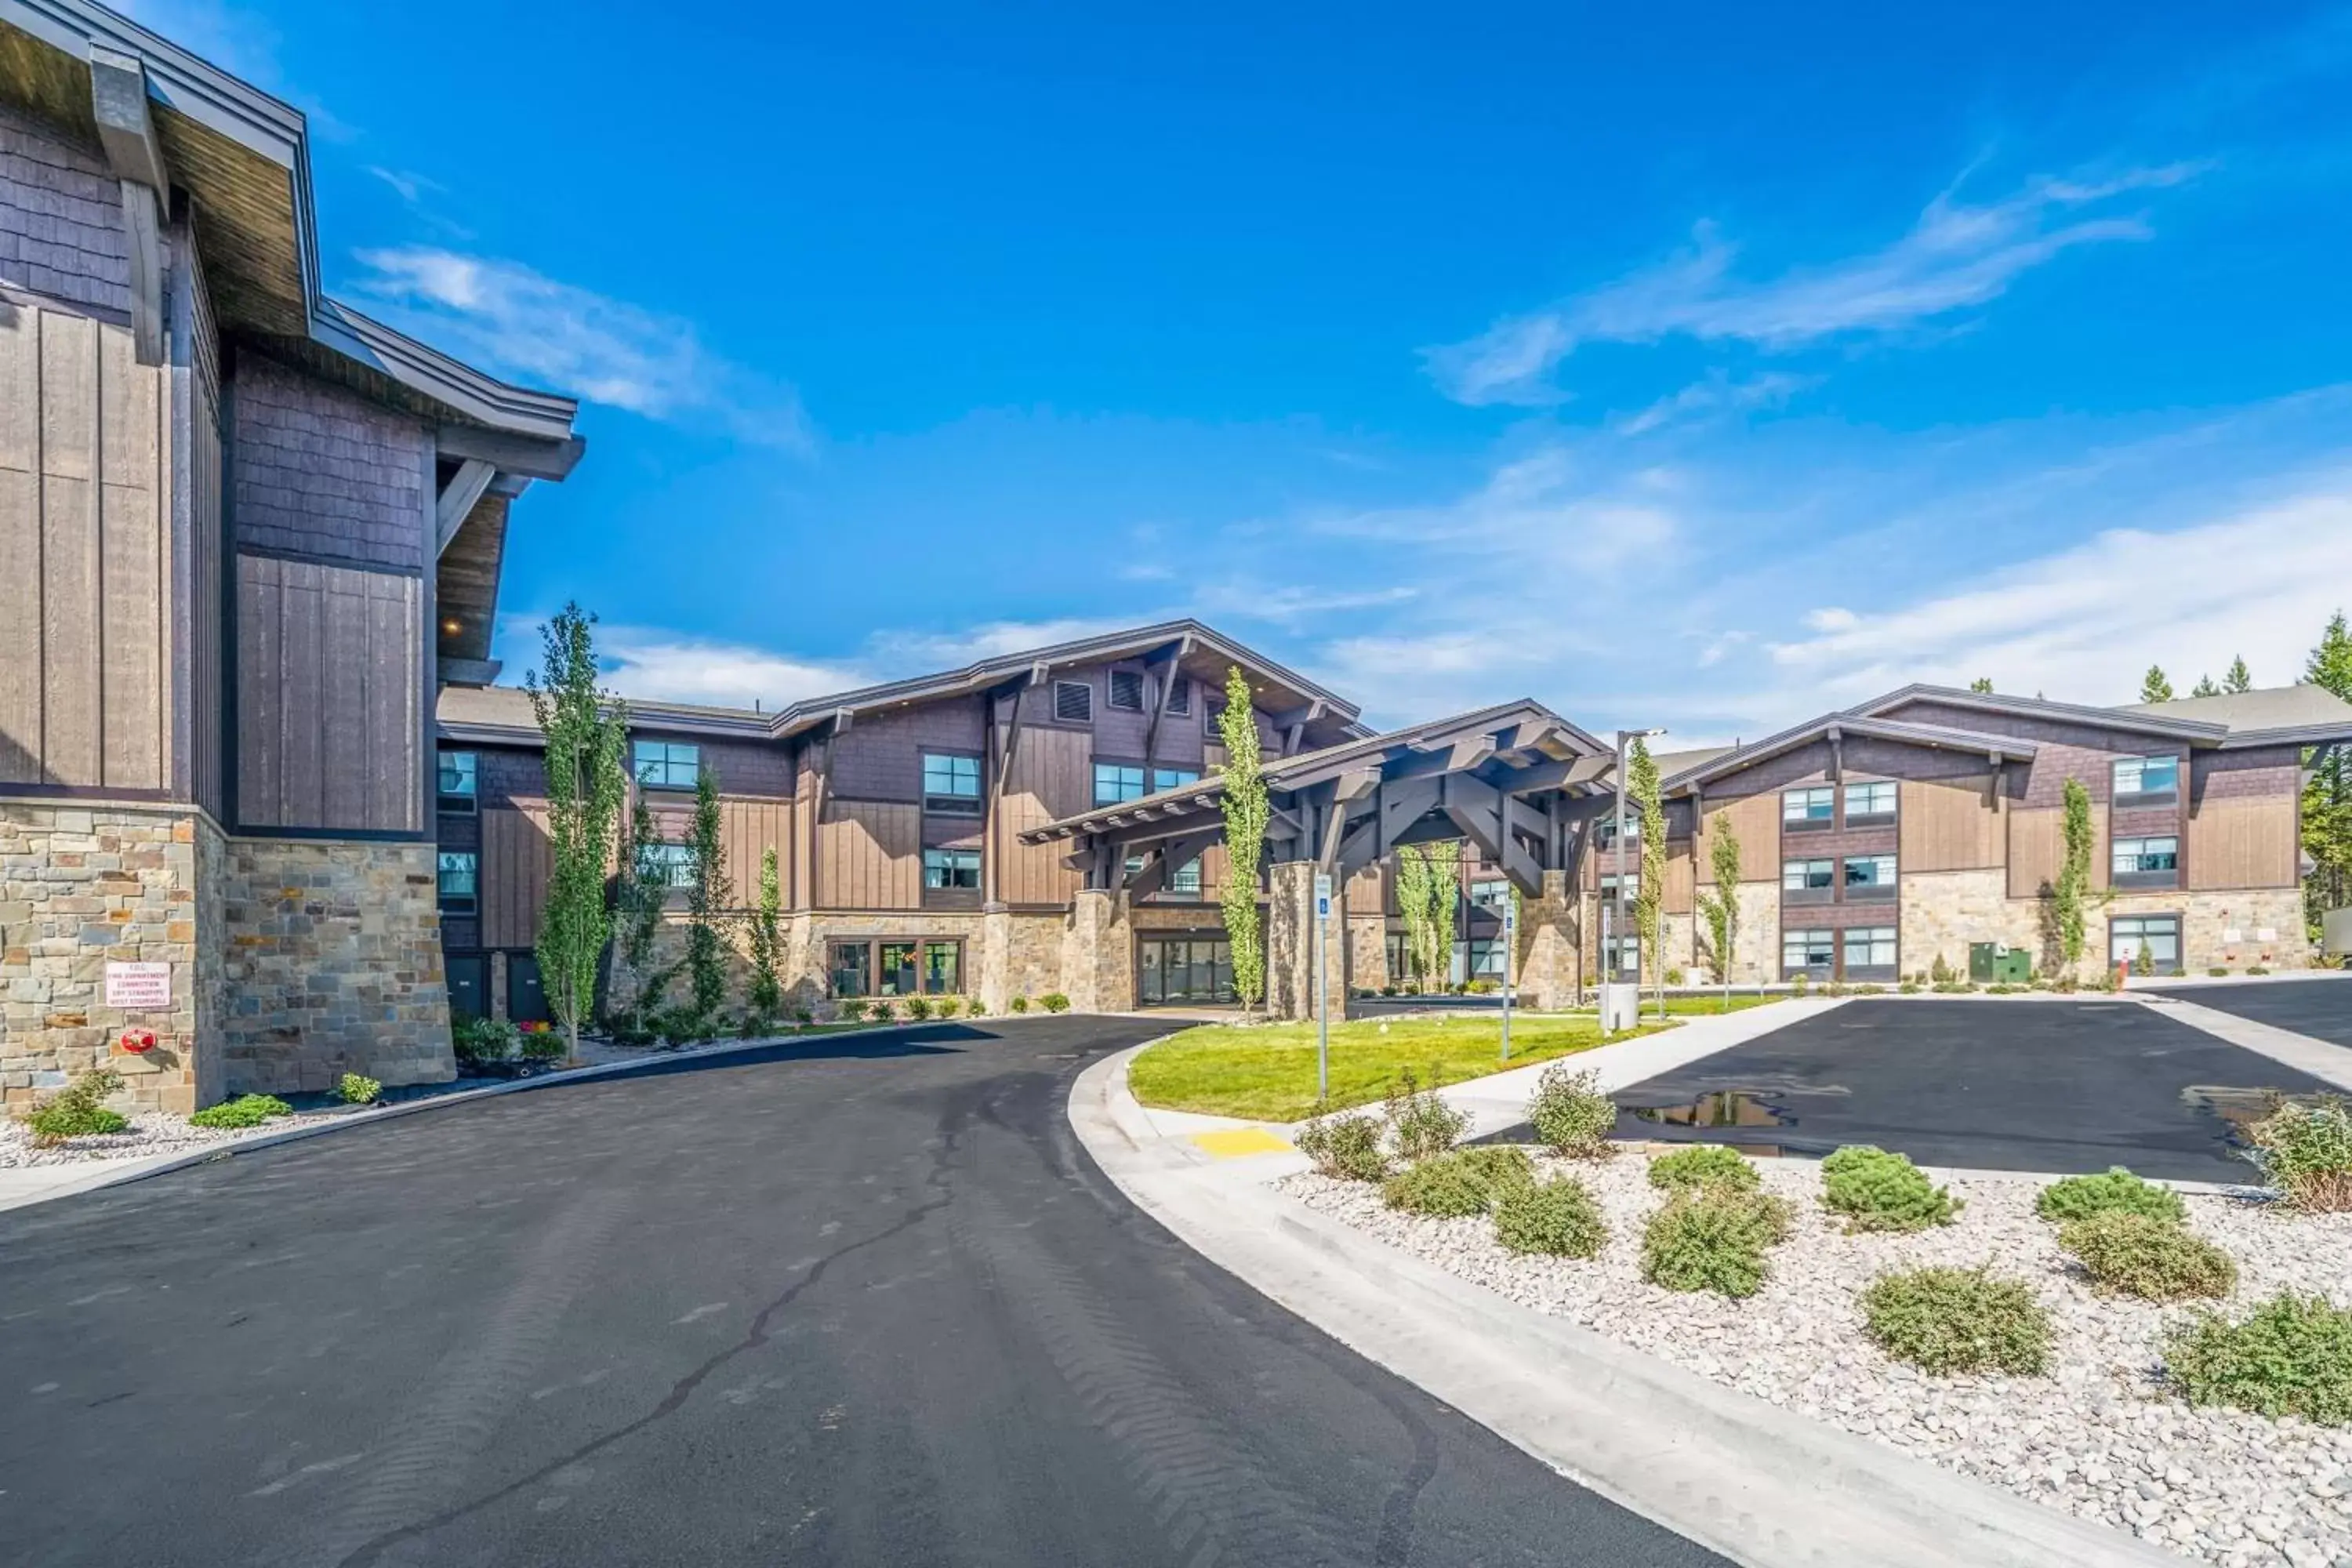 Property building in SpringHill Suites Island Park Yellowstone